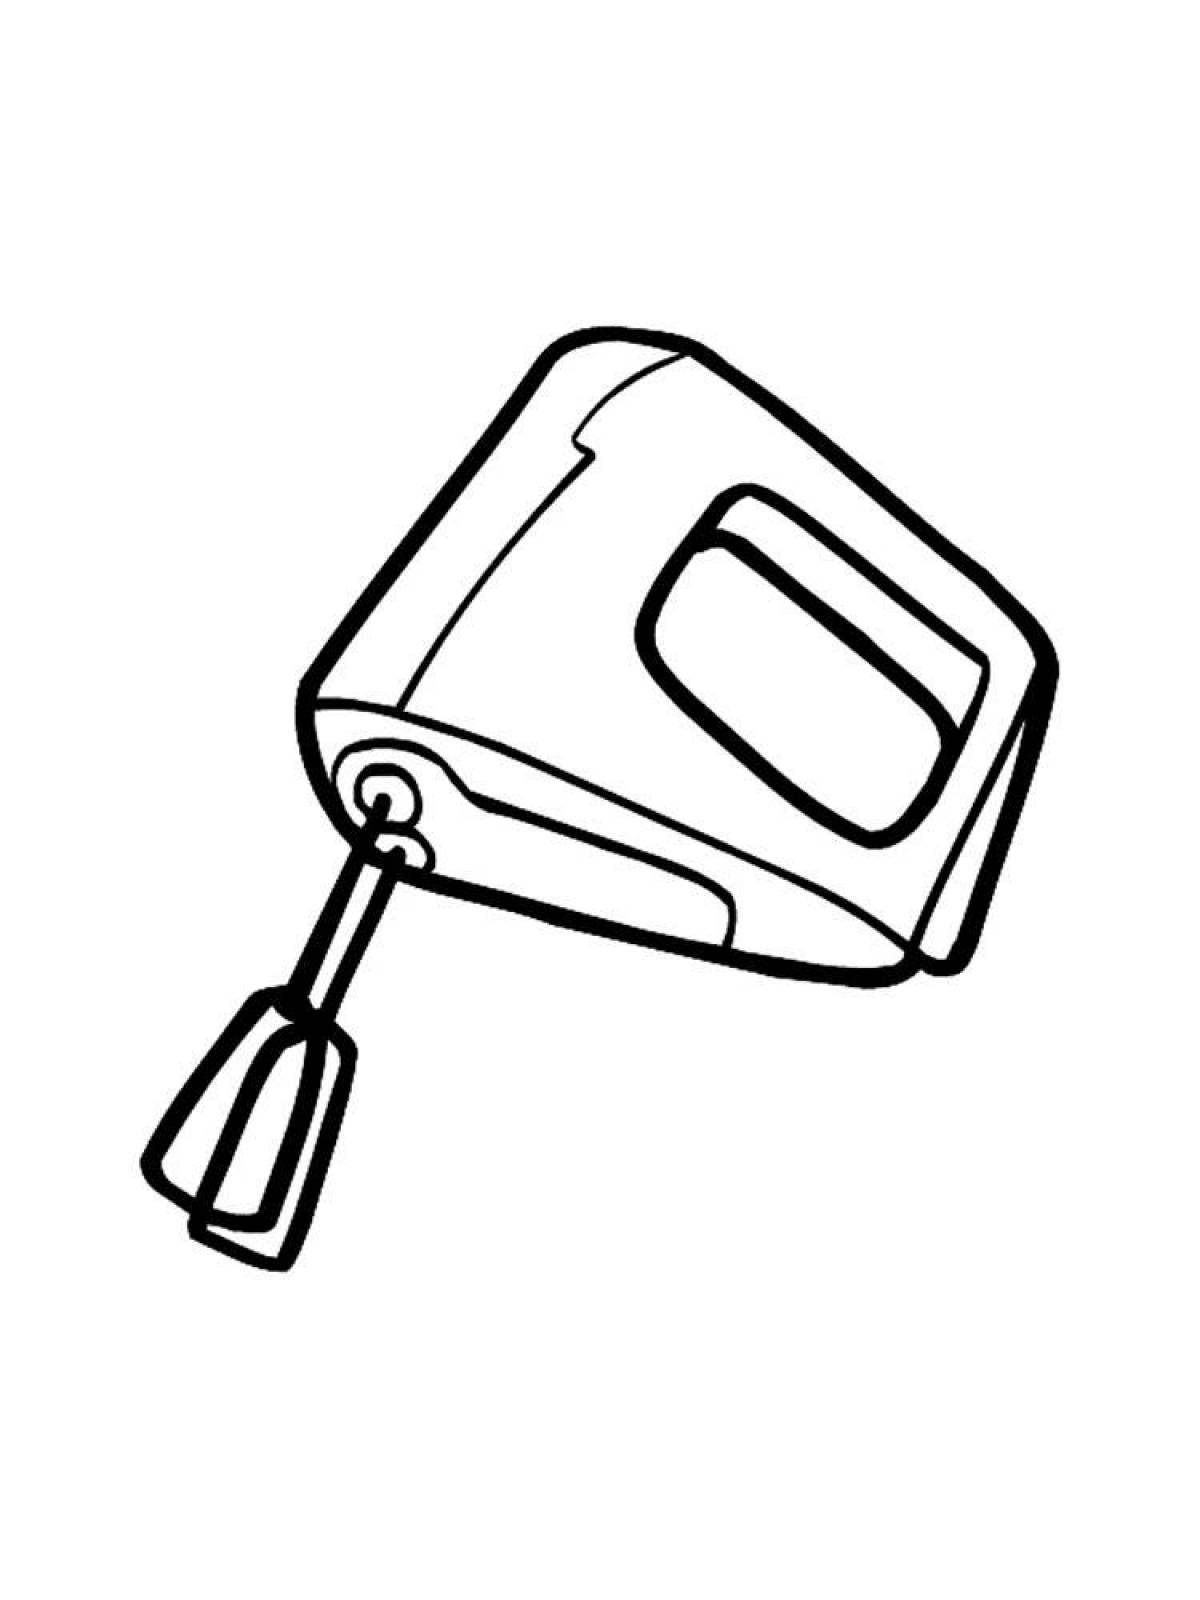 Electrical appliances coloring page